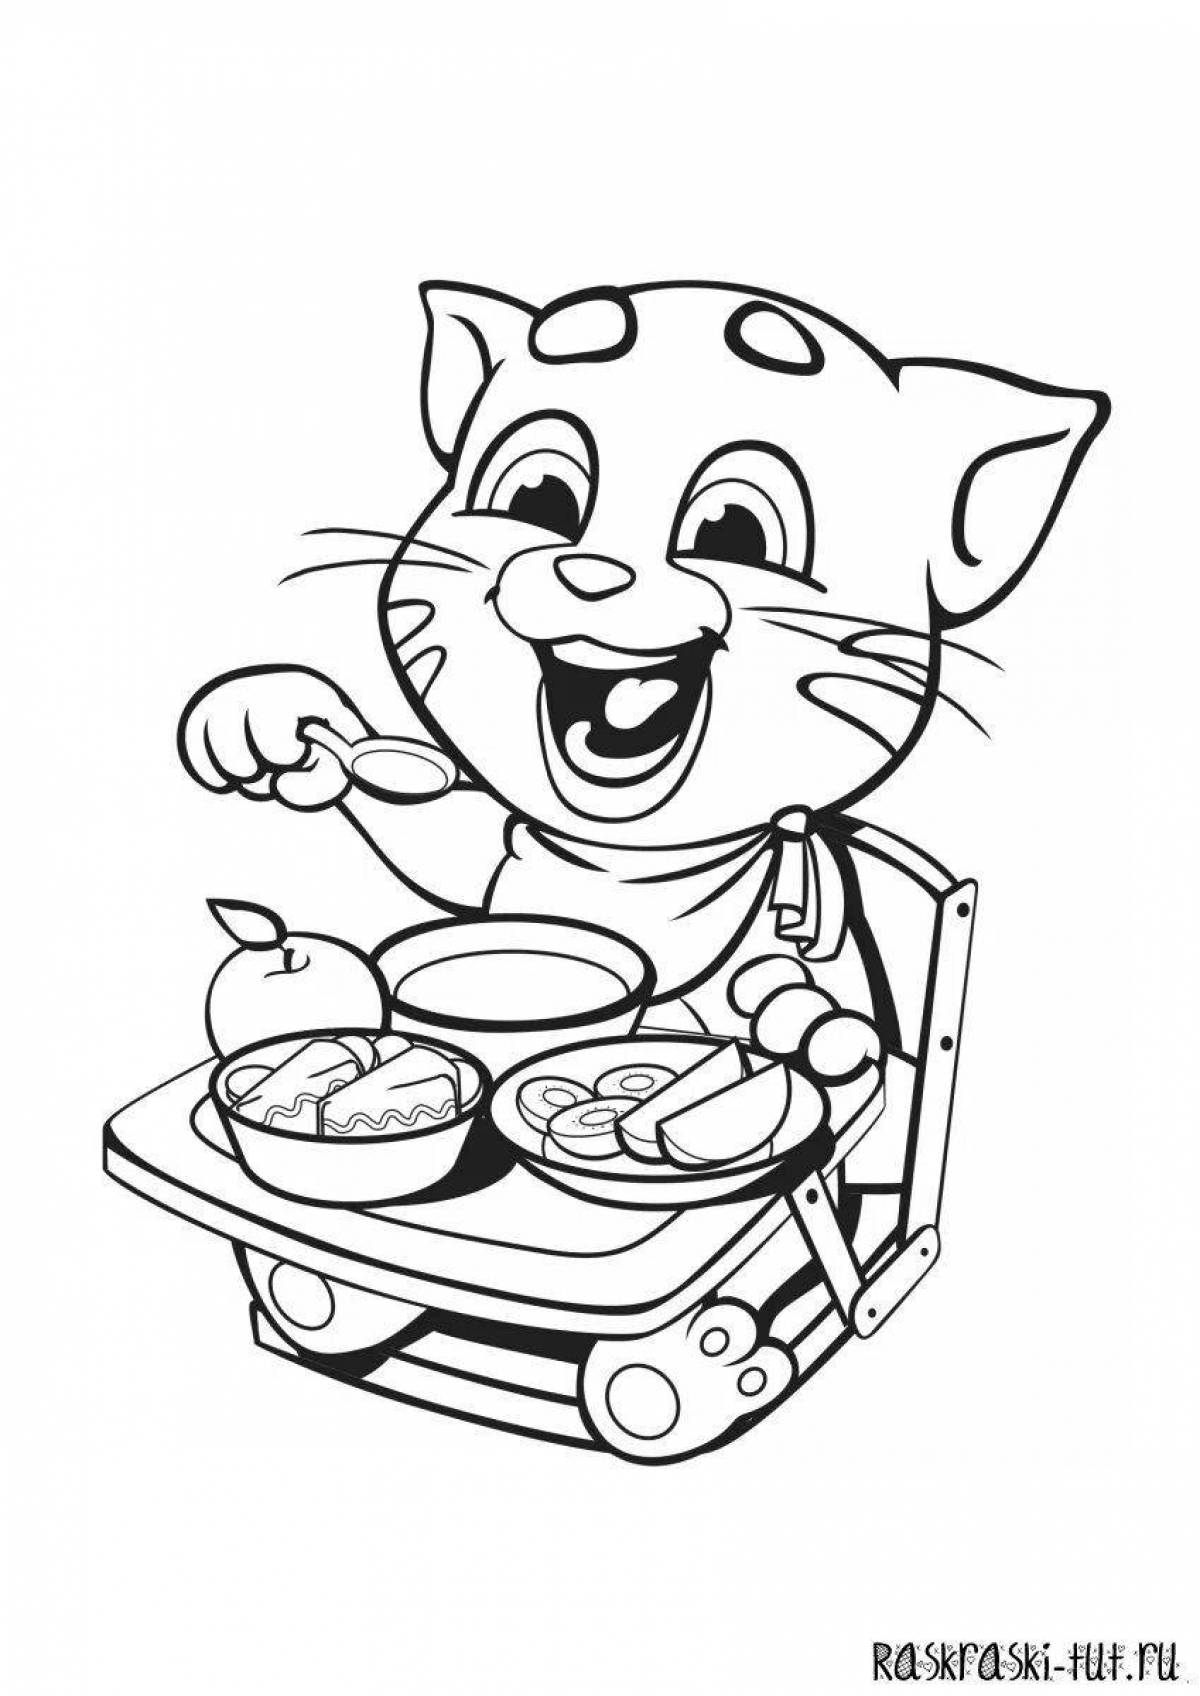 Tom and Angela coloring pages for kids